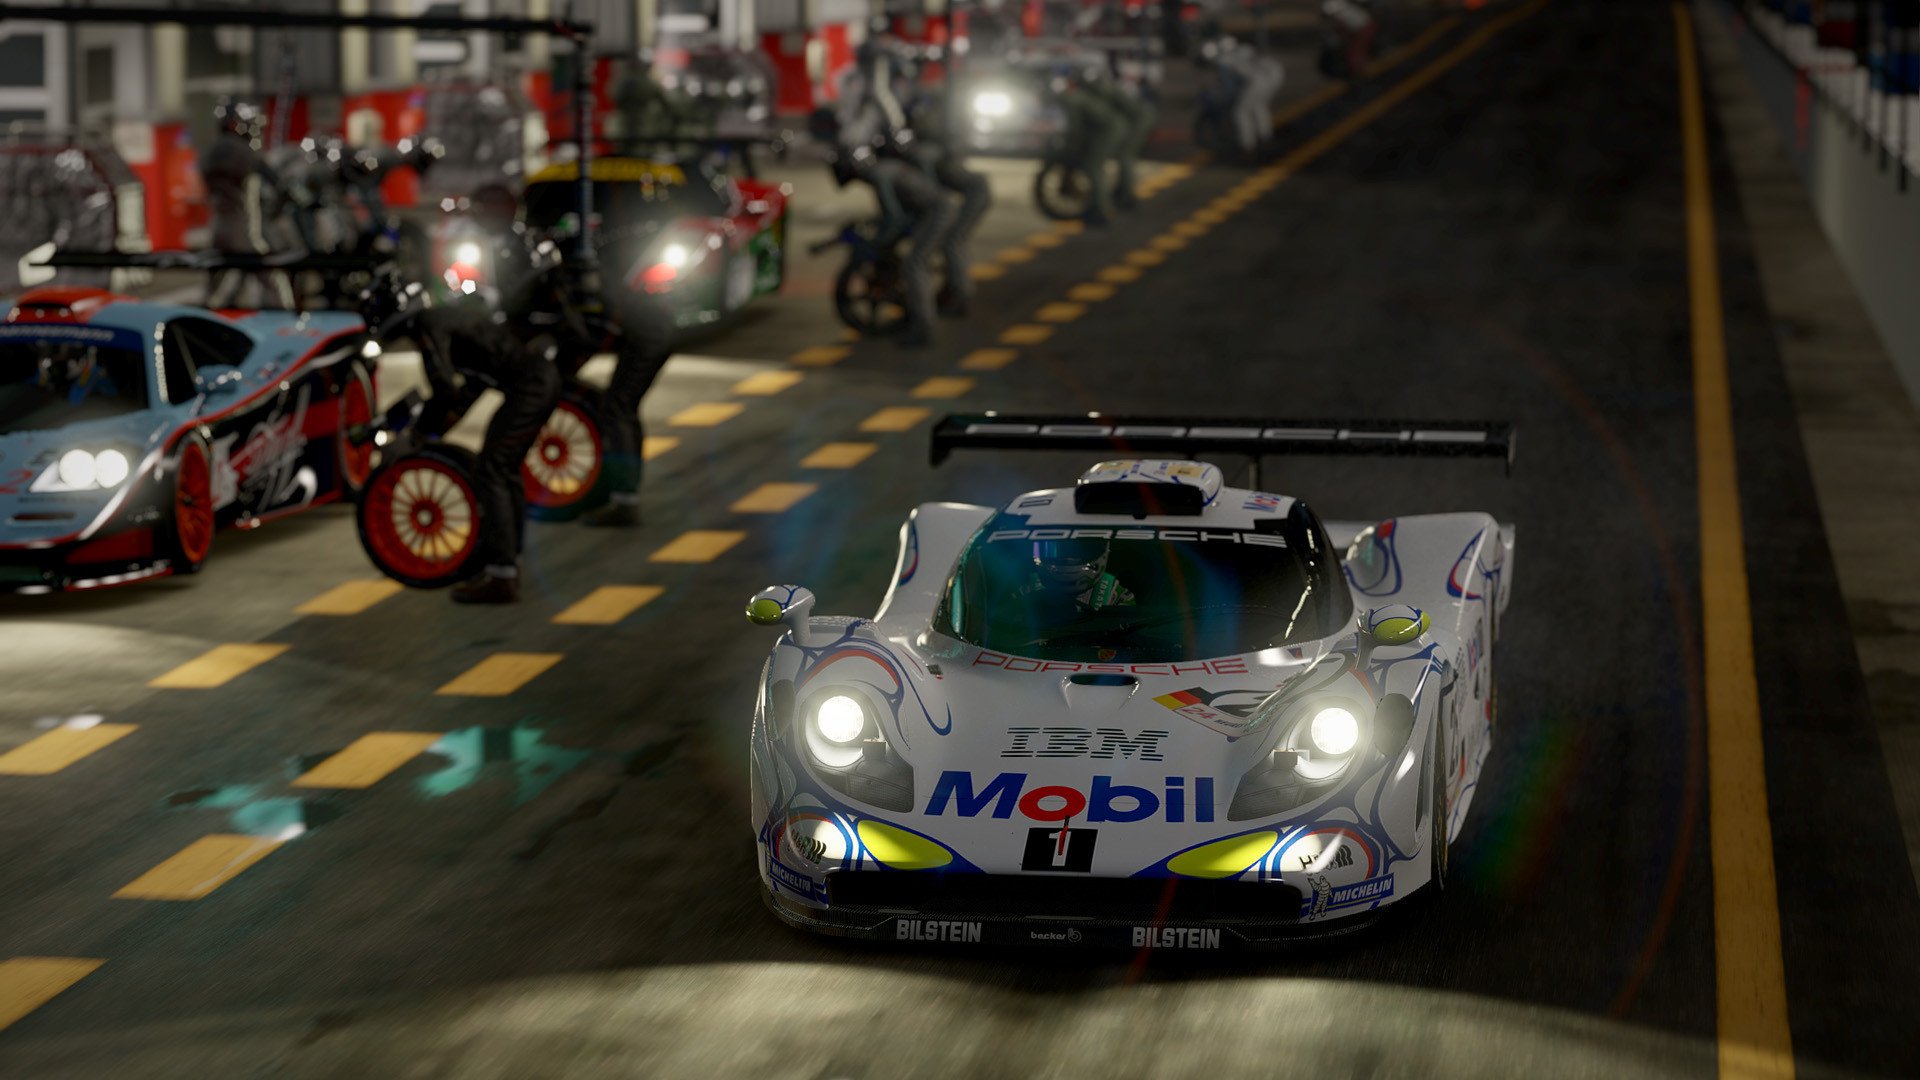 More information about "Ian Bell conferma l'arrivo di Project CARS 3, ma..."